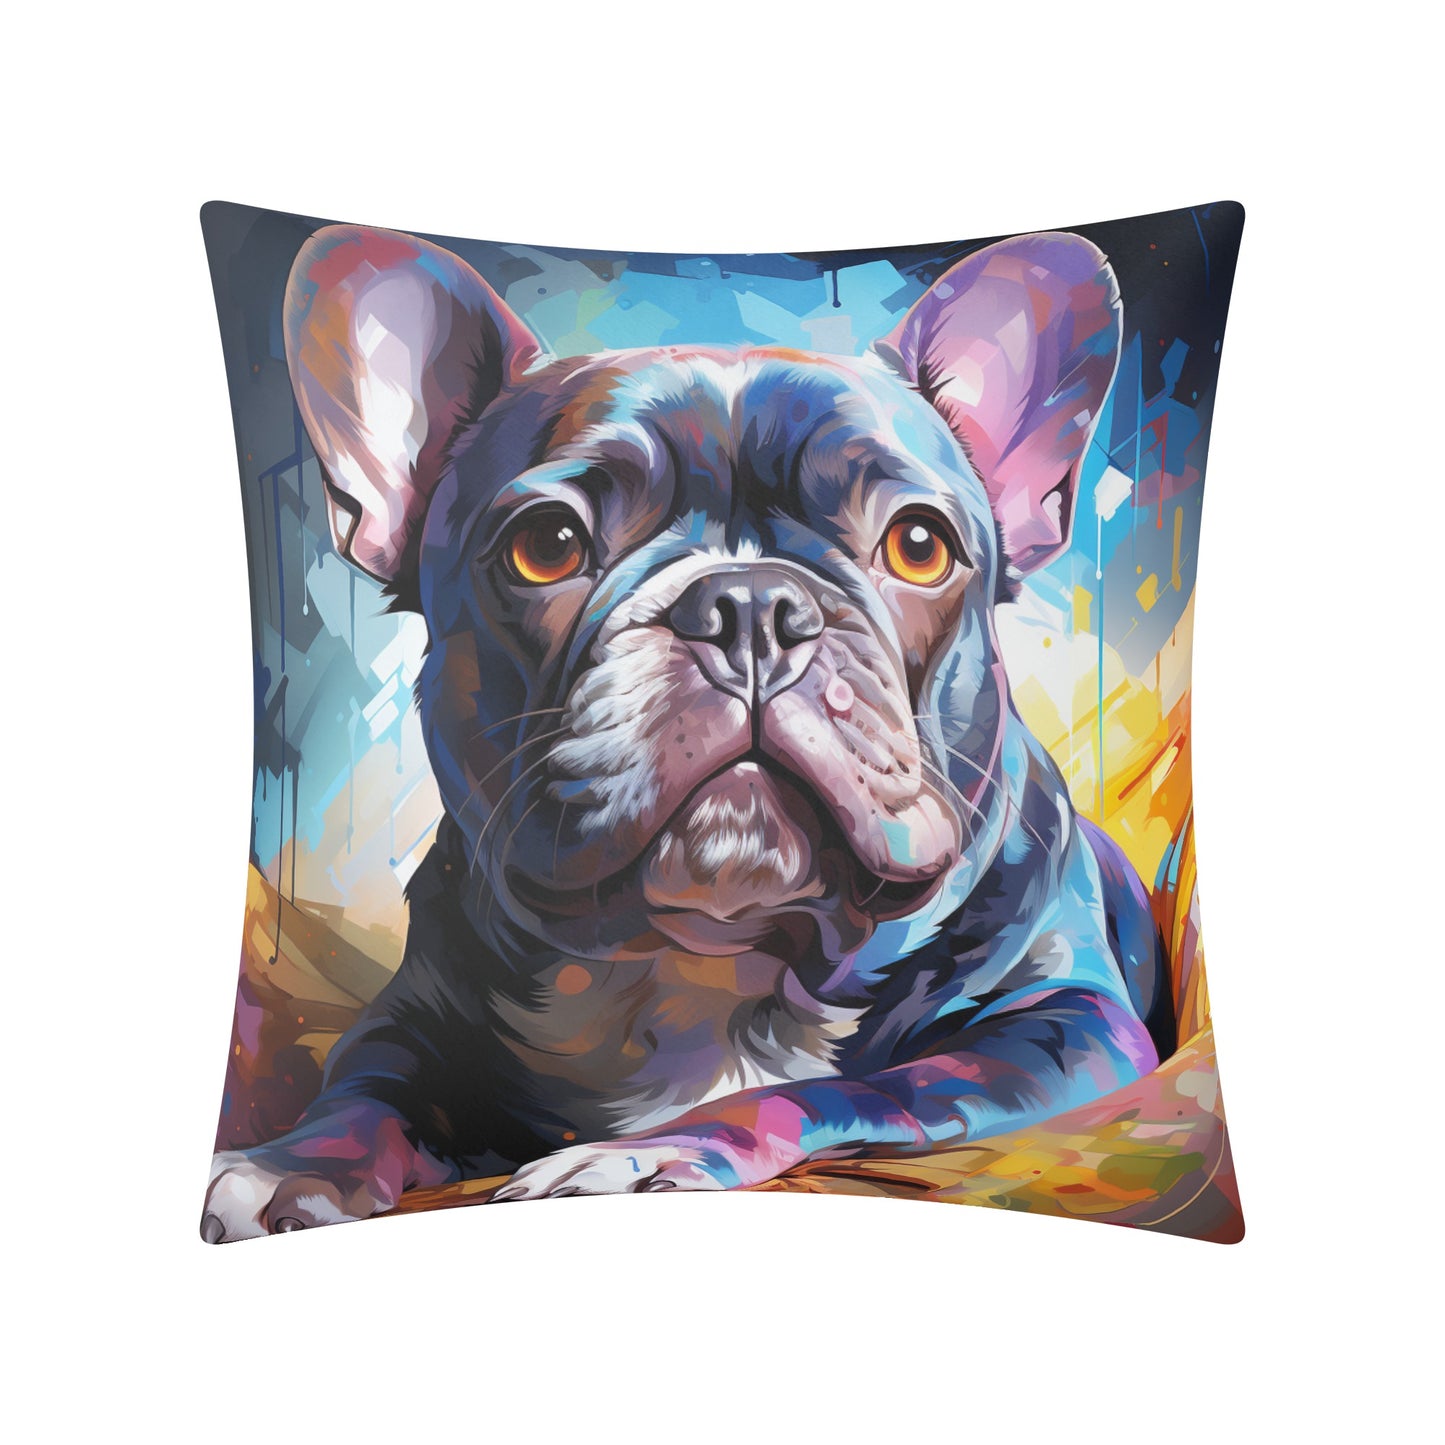 Vibrant Pillow Cover